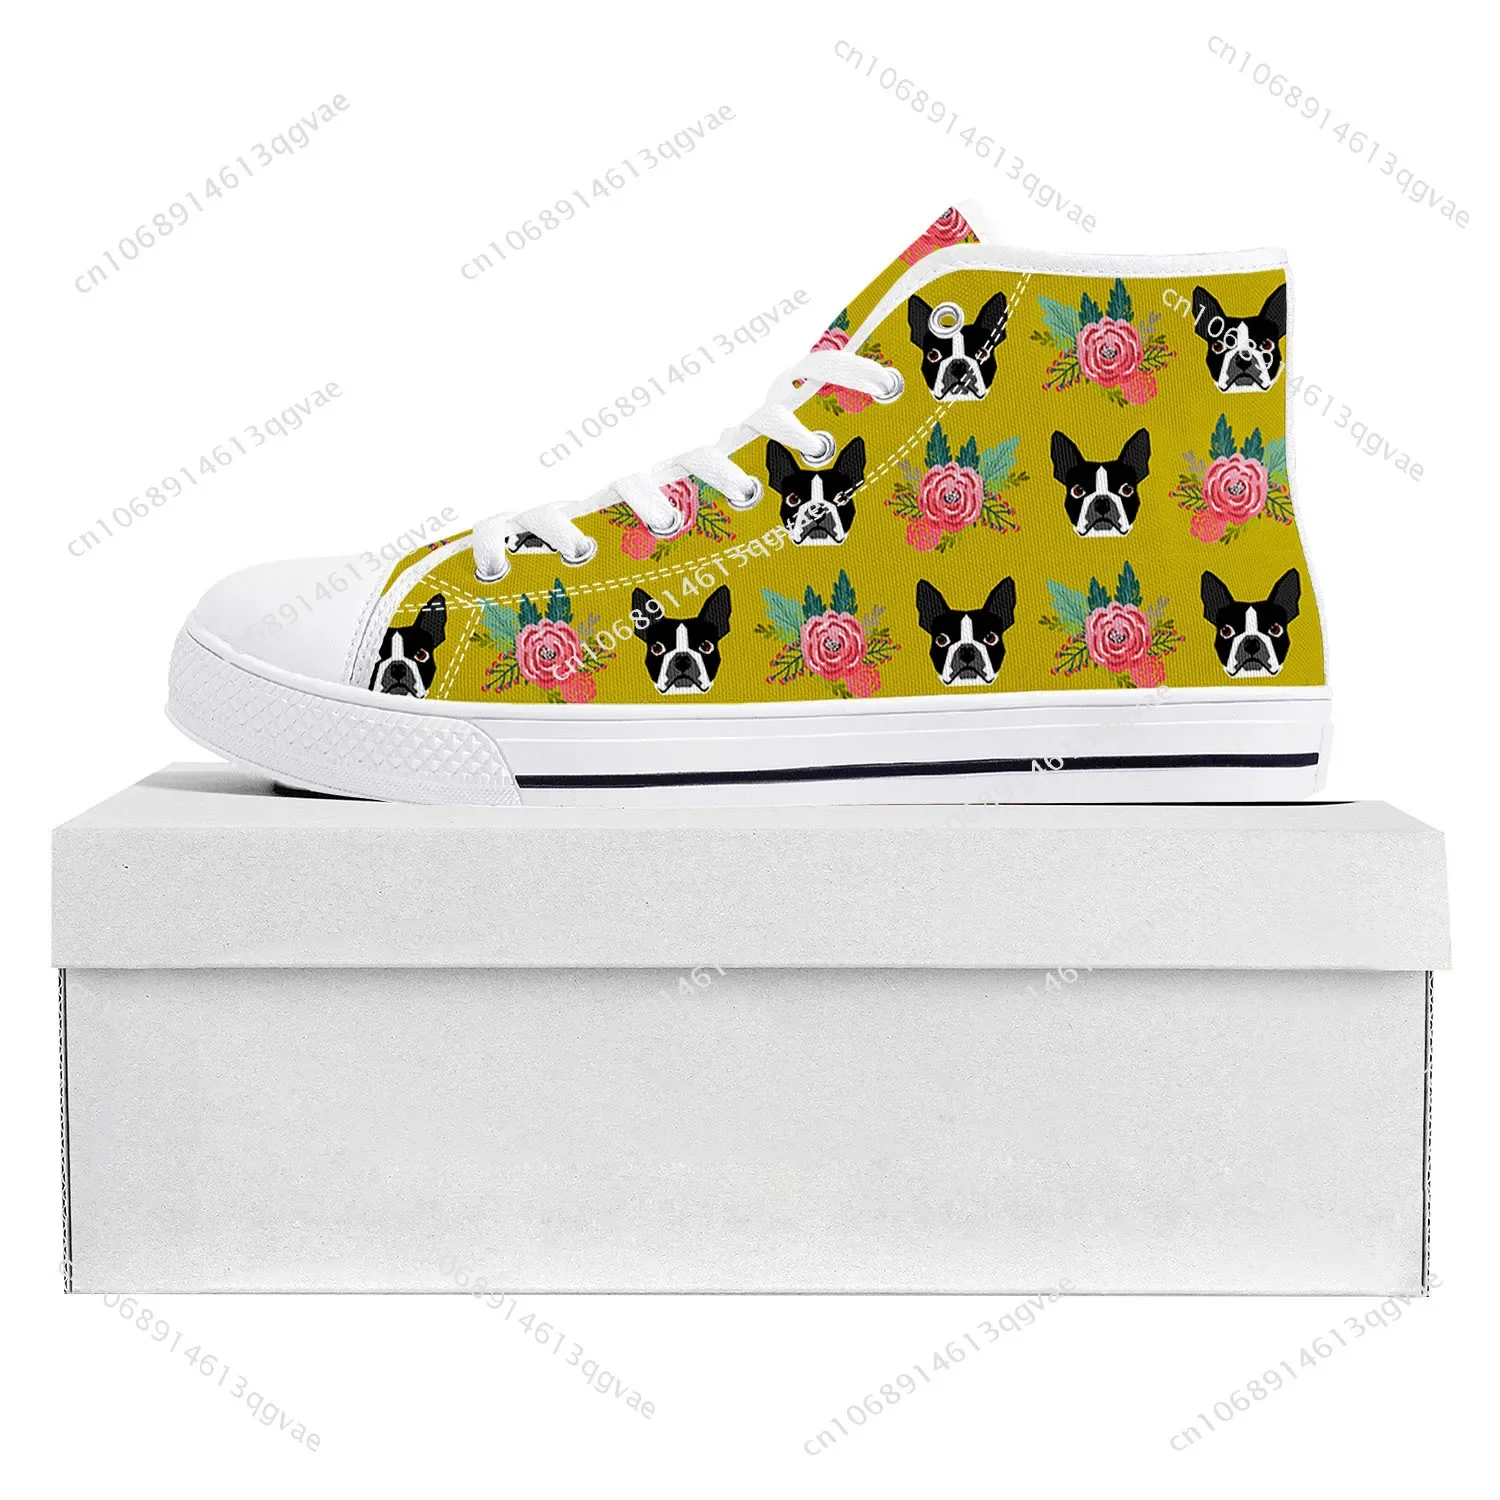 

Boston Terrier High Top High Quality Sneakers Mens Womens Teenager Canvas Sneaker Casual Couple Shoes Custom Made Shoe White